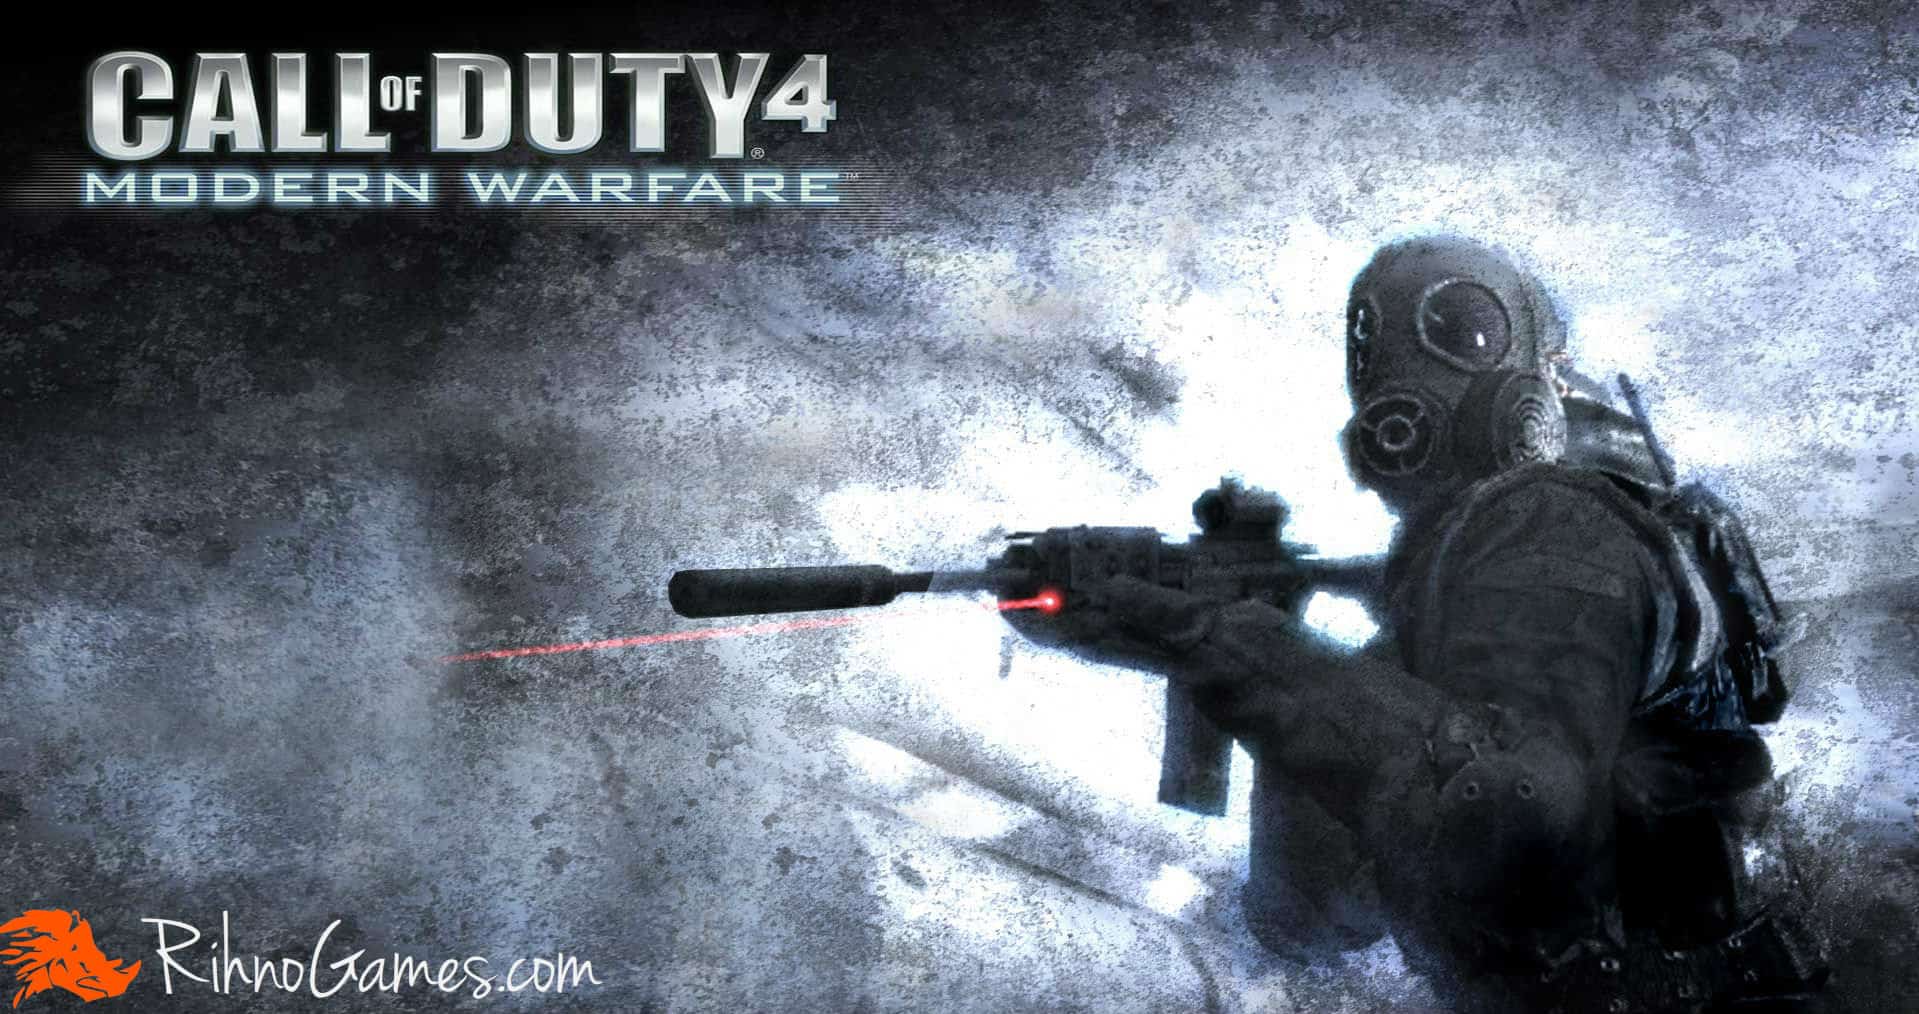 Call of Duty 4 Modern Warfare system Requirements